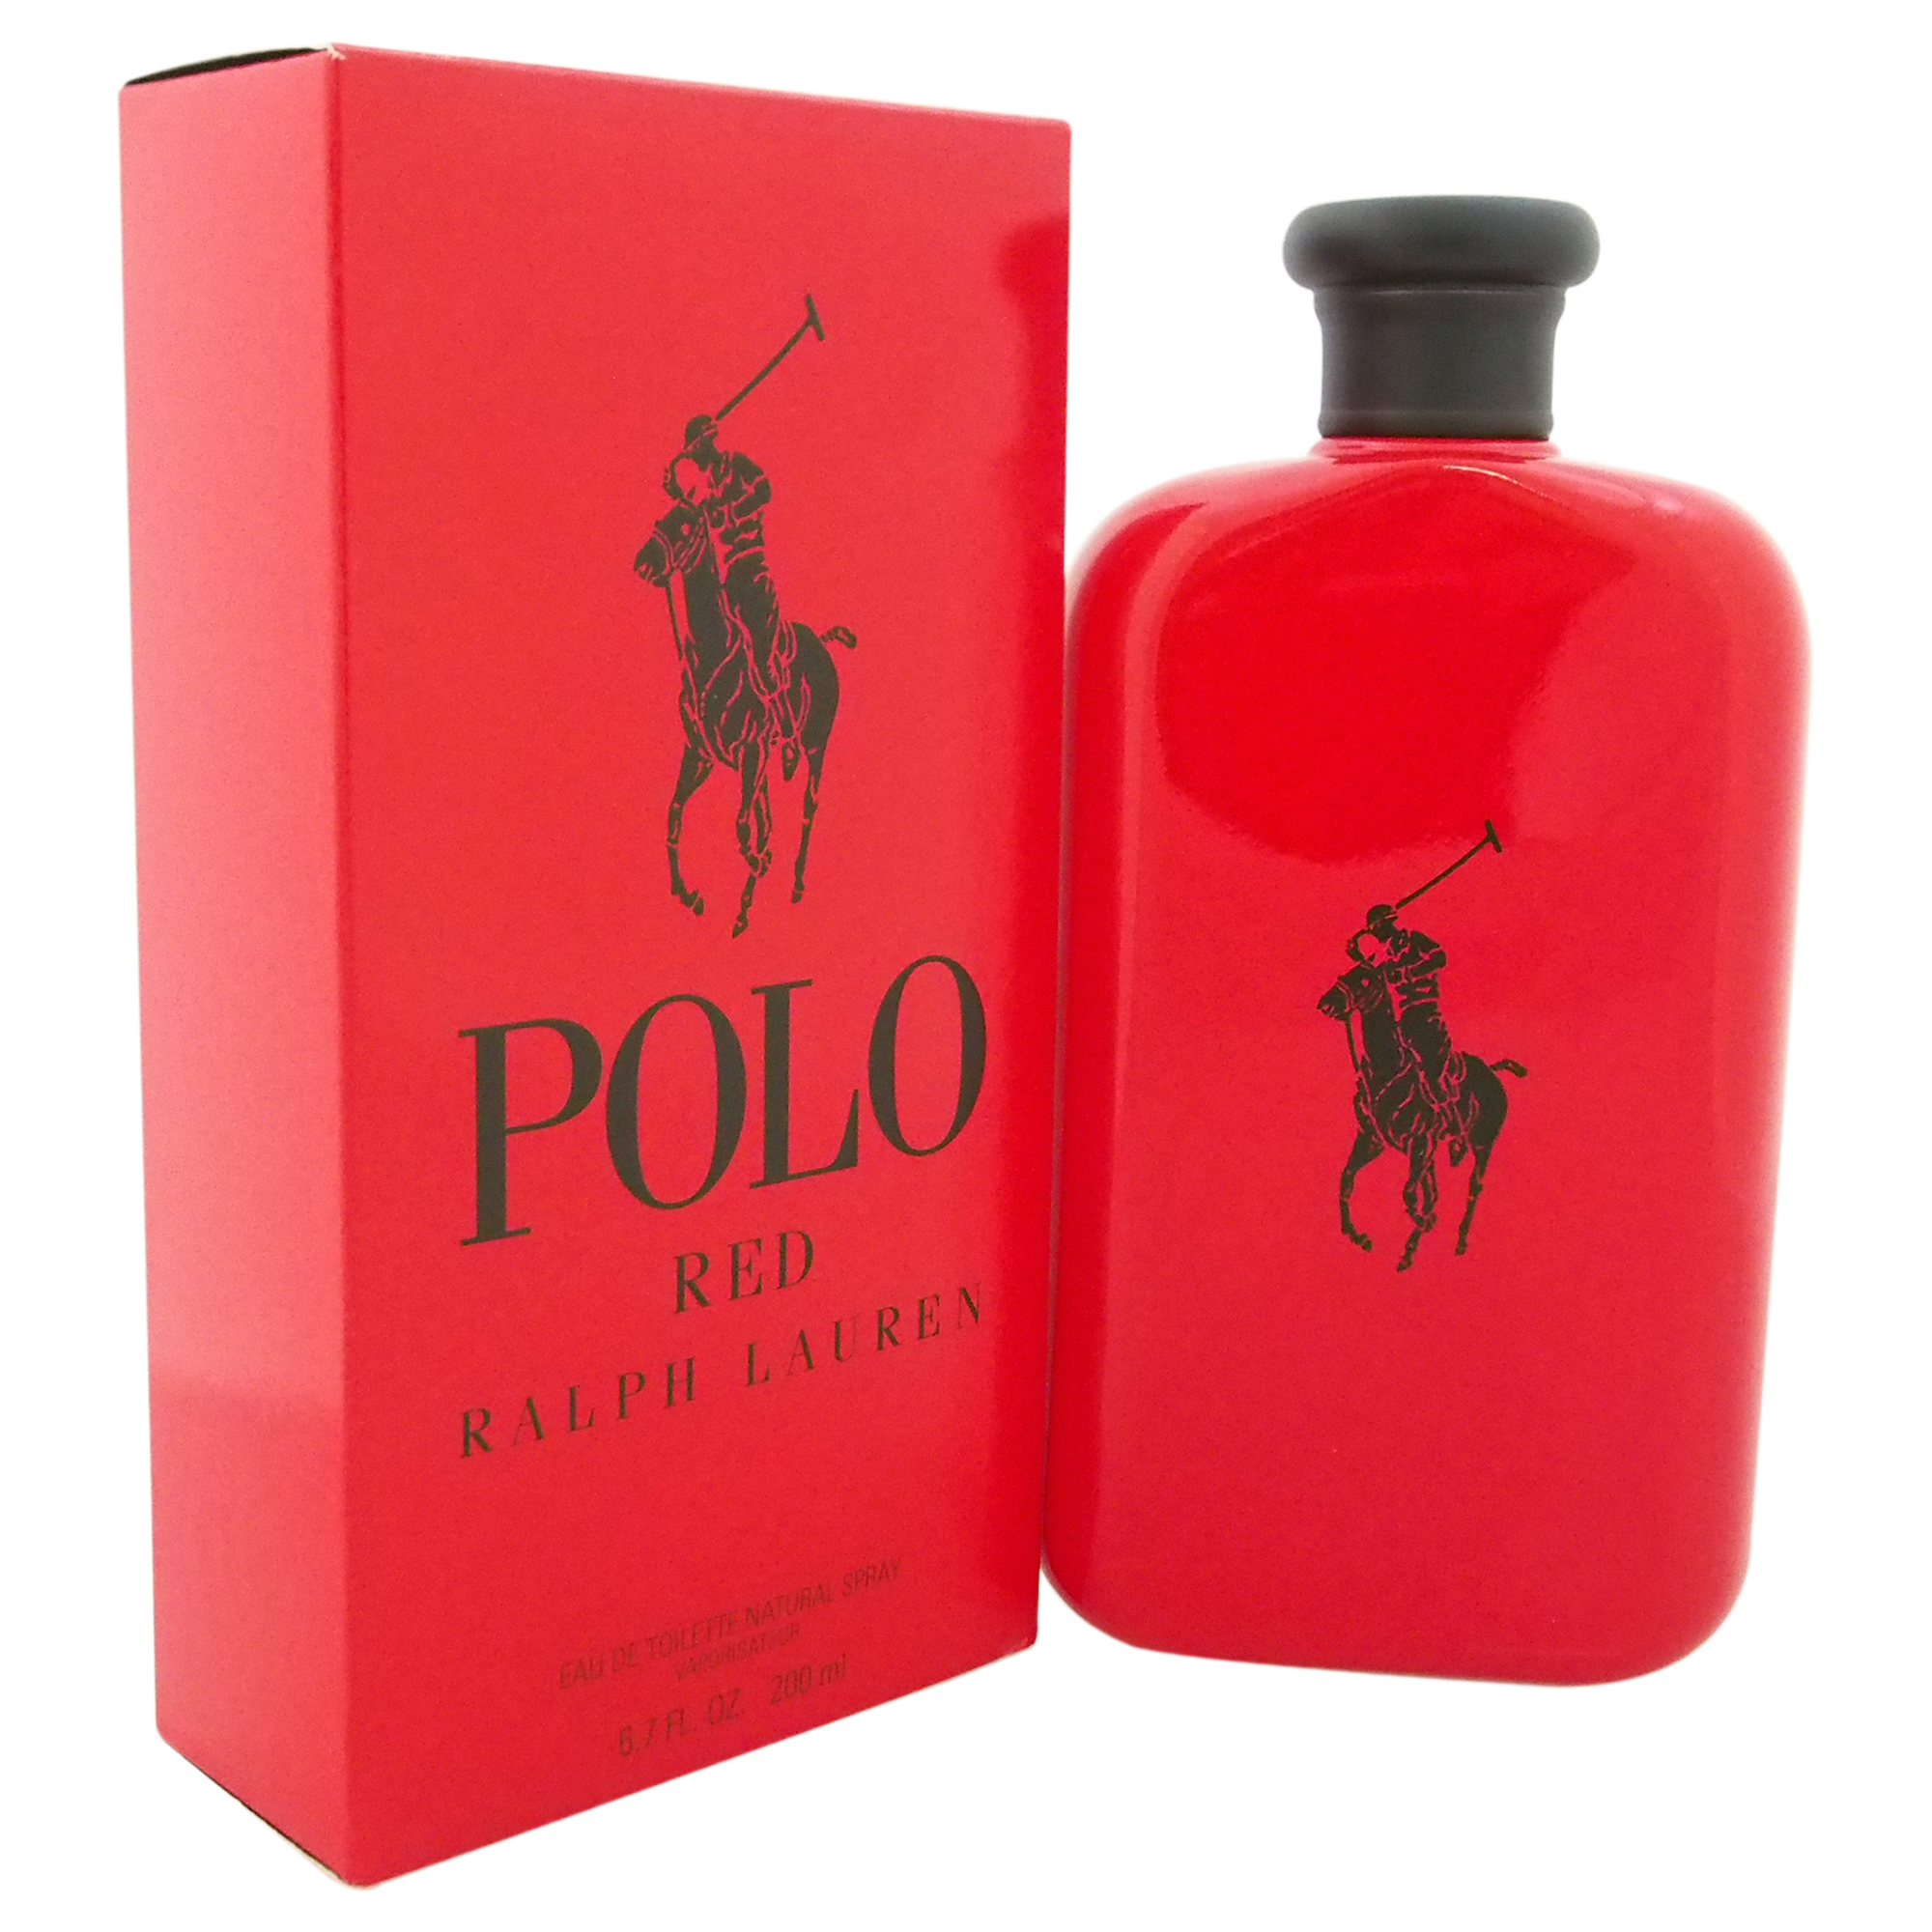 POLO RED by Ralph Lauren for Men - 6.7 oz EDT Spray